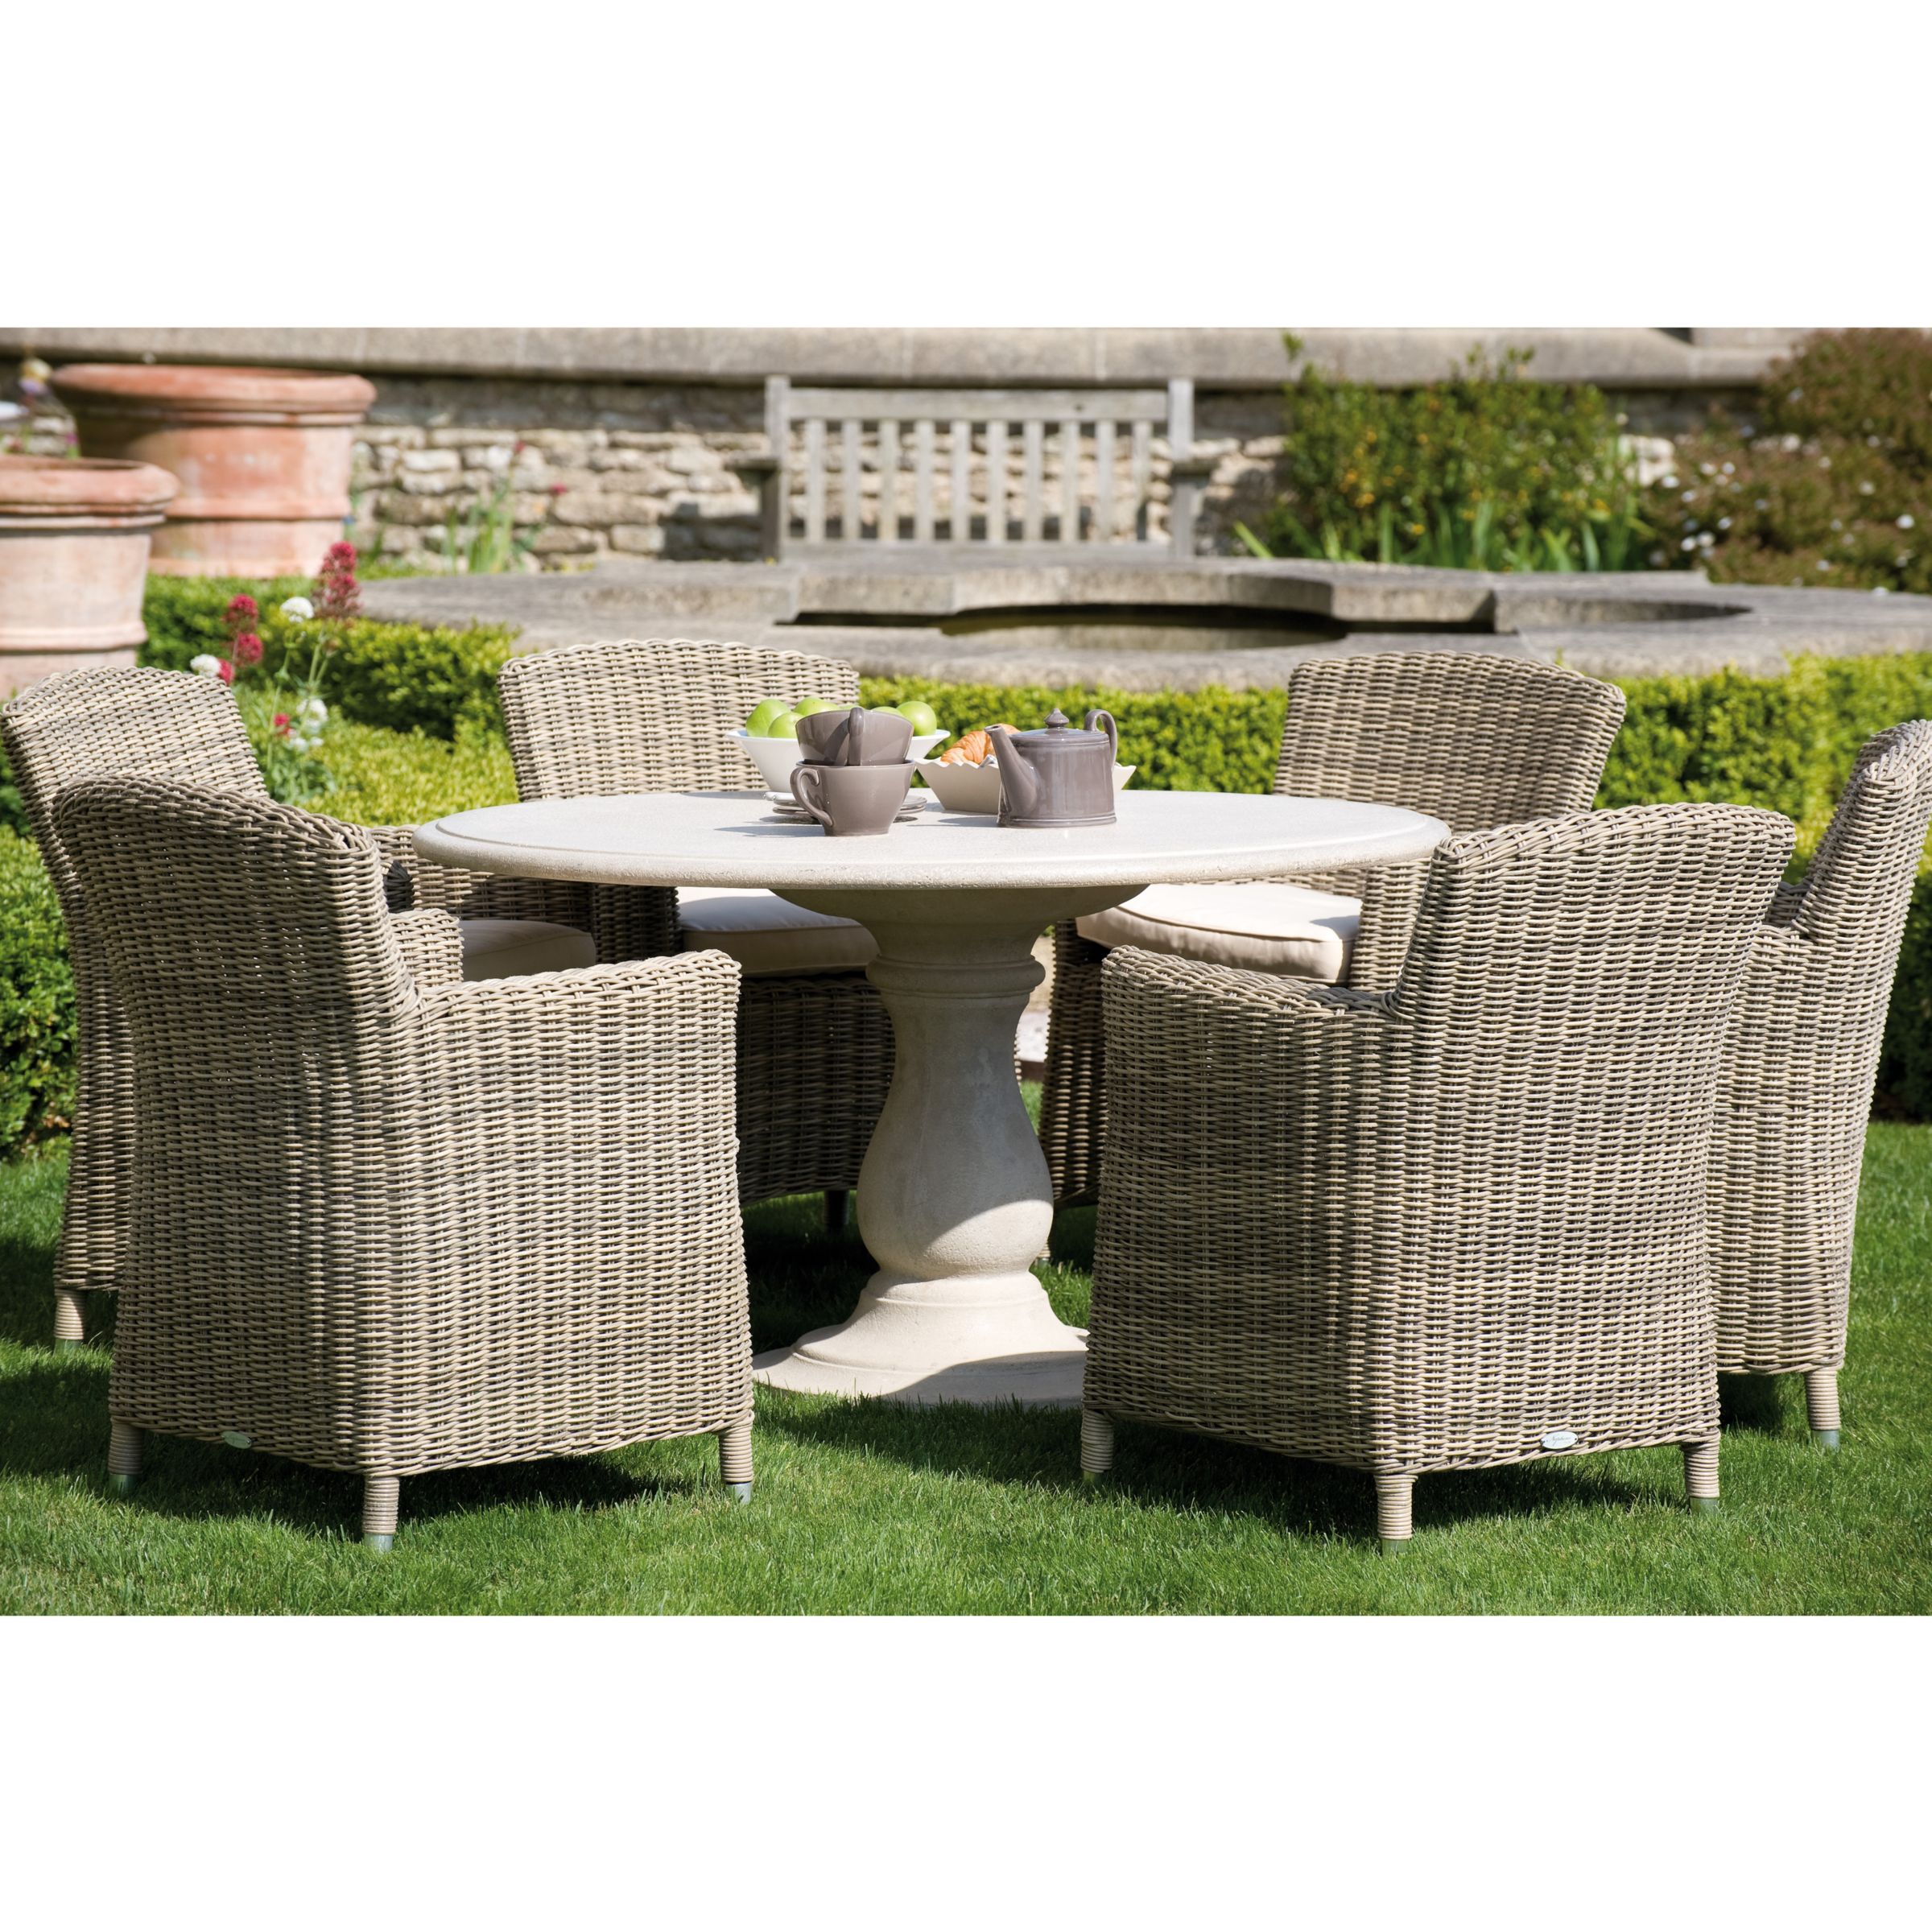 Neptune Portland Round 6 Seater Outdoor Dining Table, Synthetic Wicker, width 130cm